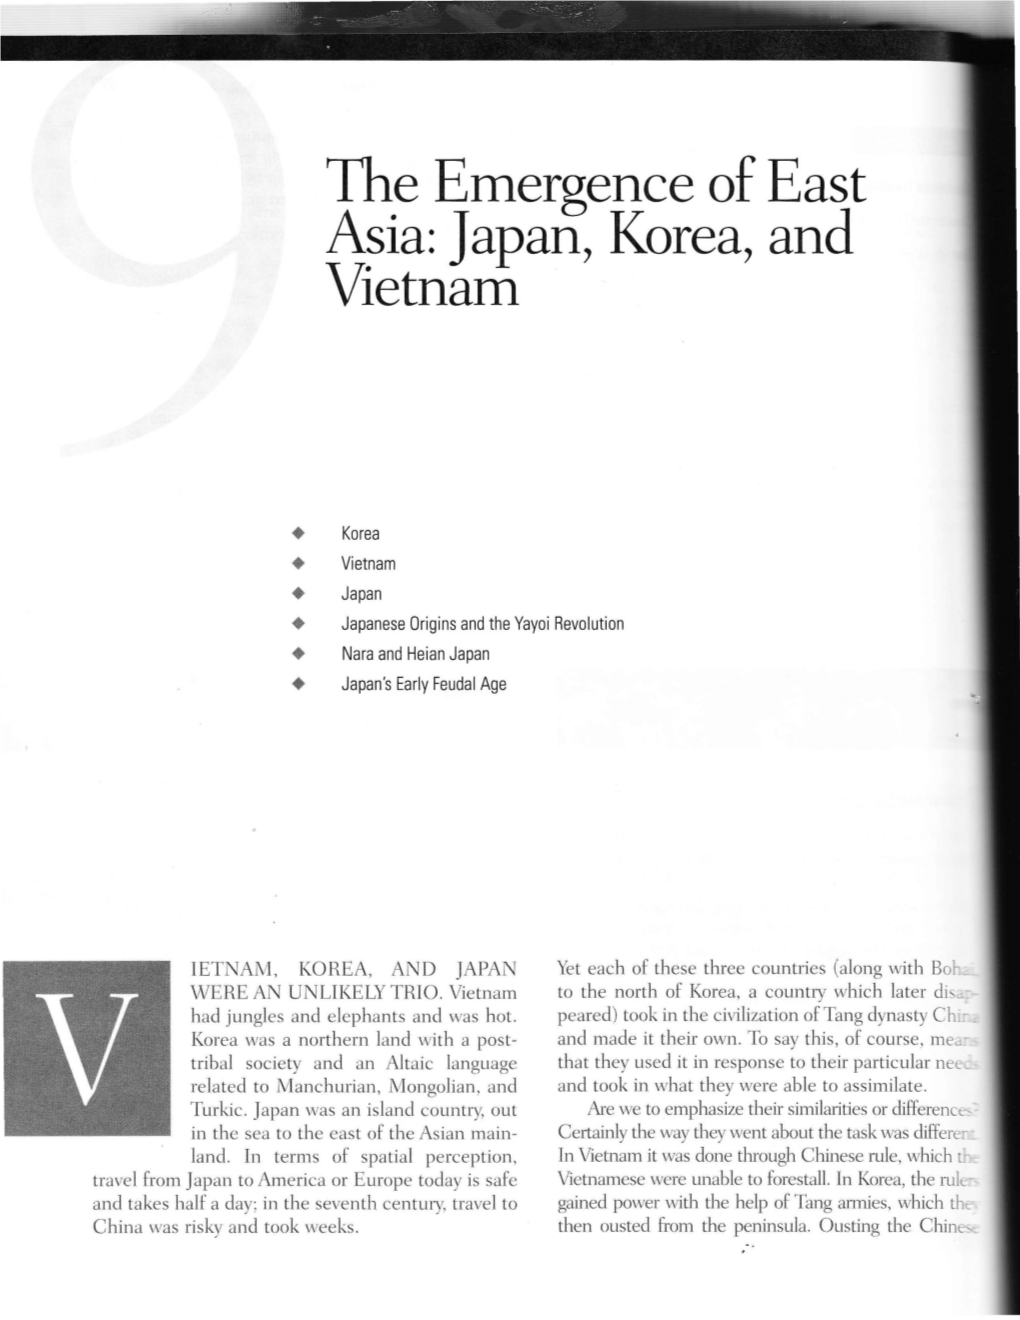 The Emergence of East Asia: Japan, Korea, and Vietnam